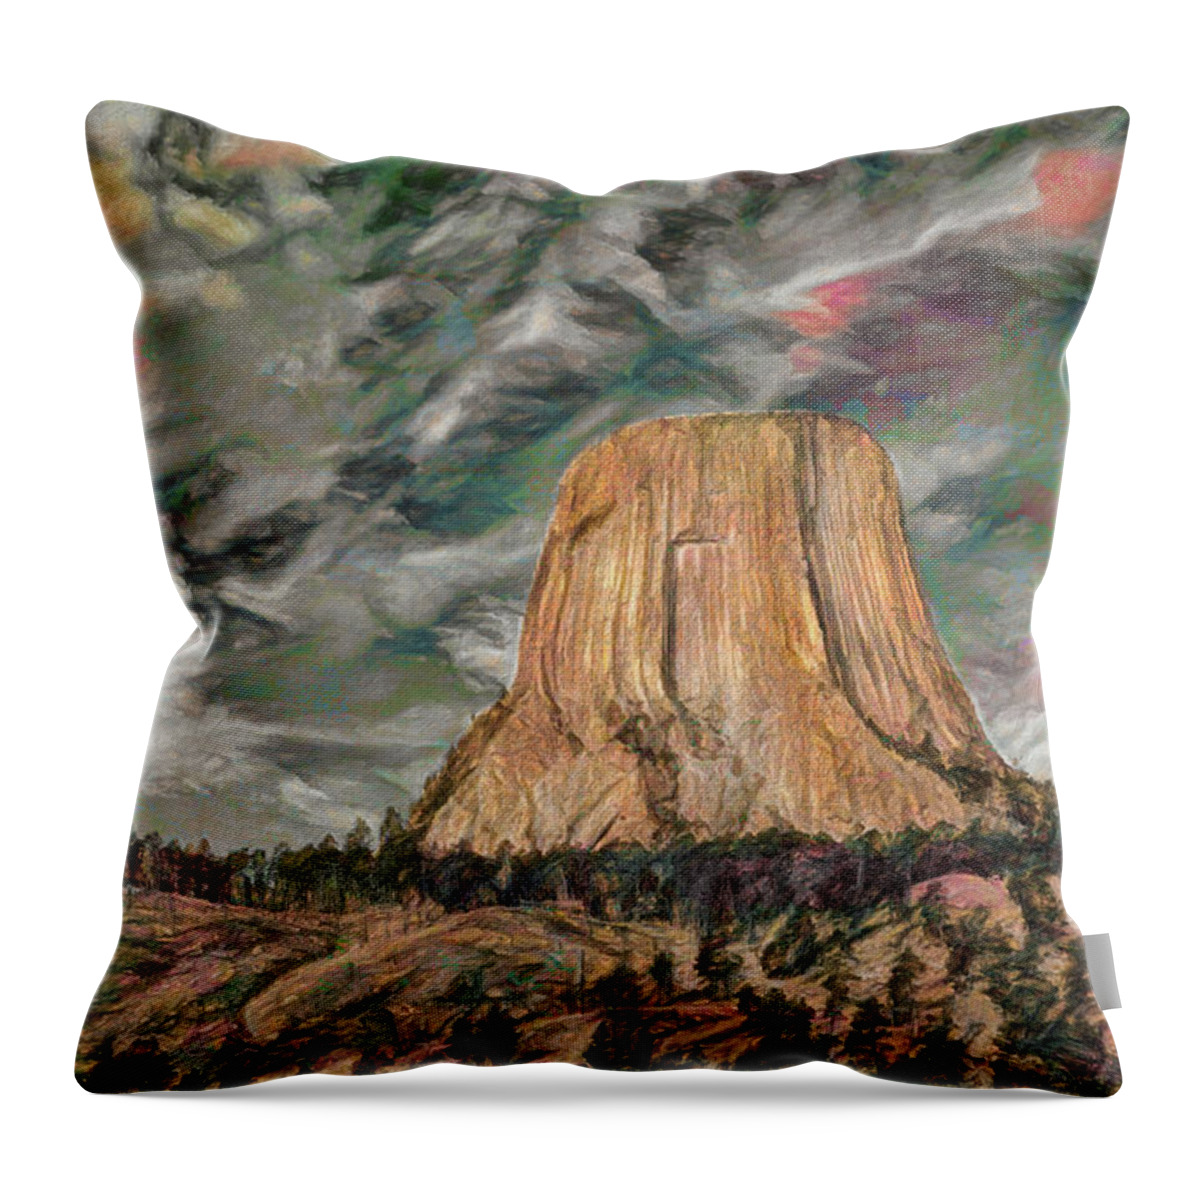 Landscape Throw Pillow featuring the photograph Transcendental Devils Tower by John M Bailey